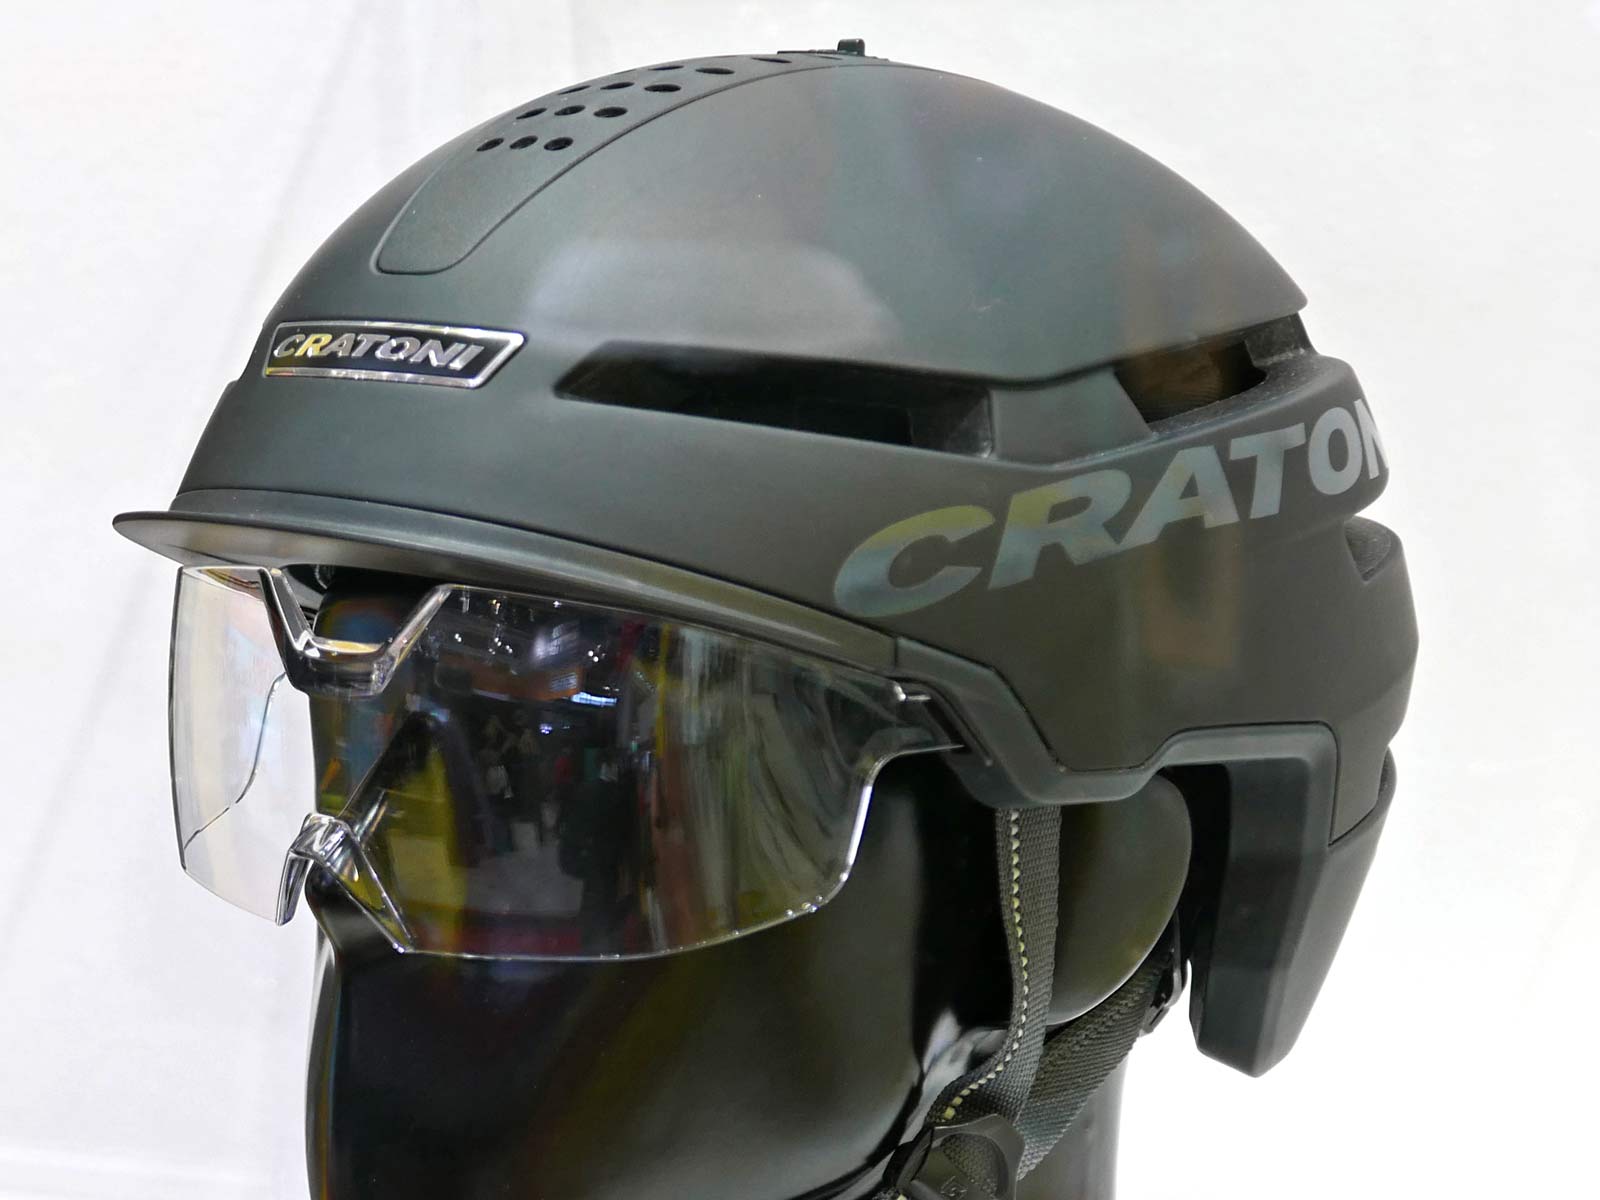 Cratoni protects with app-connected Smartride & more commuter helmets